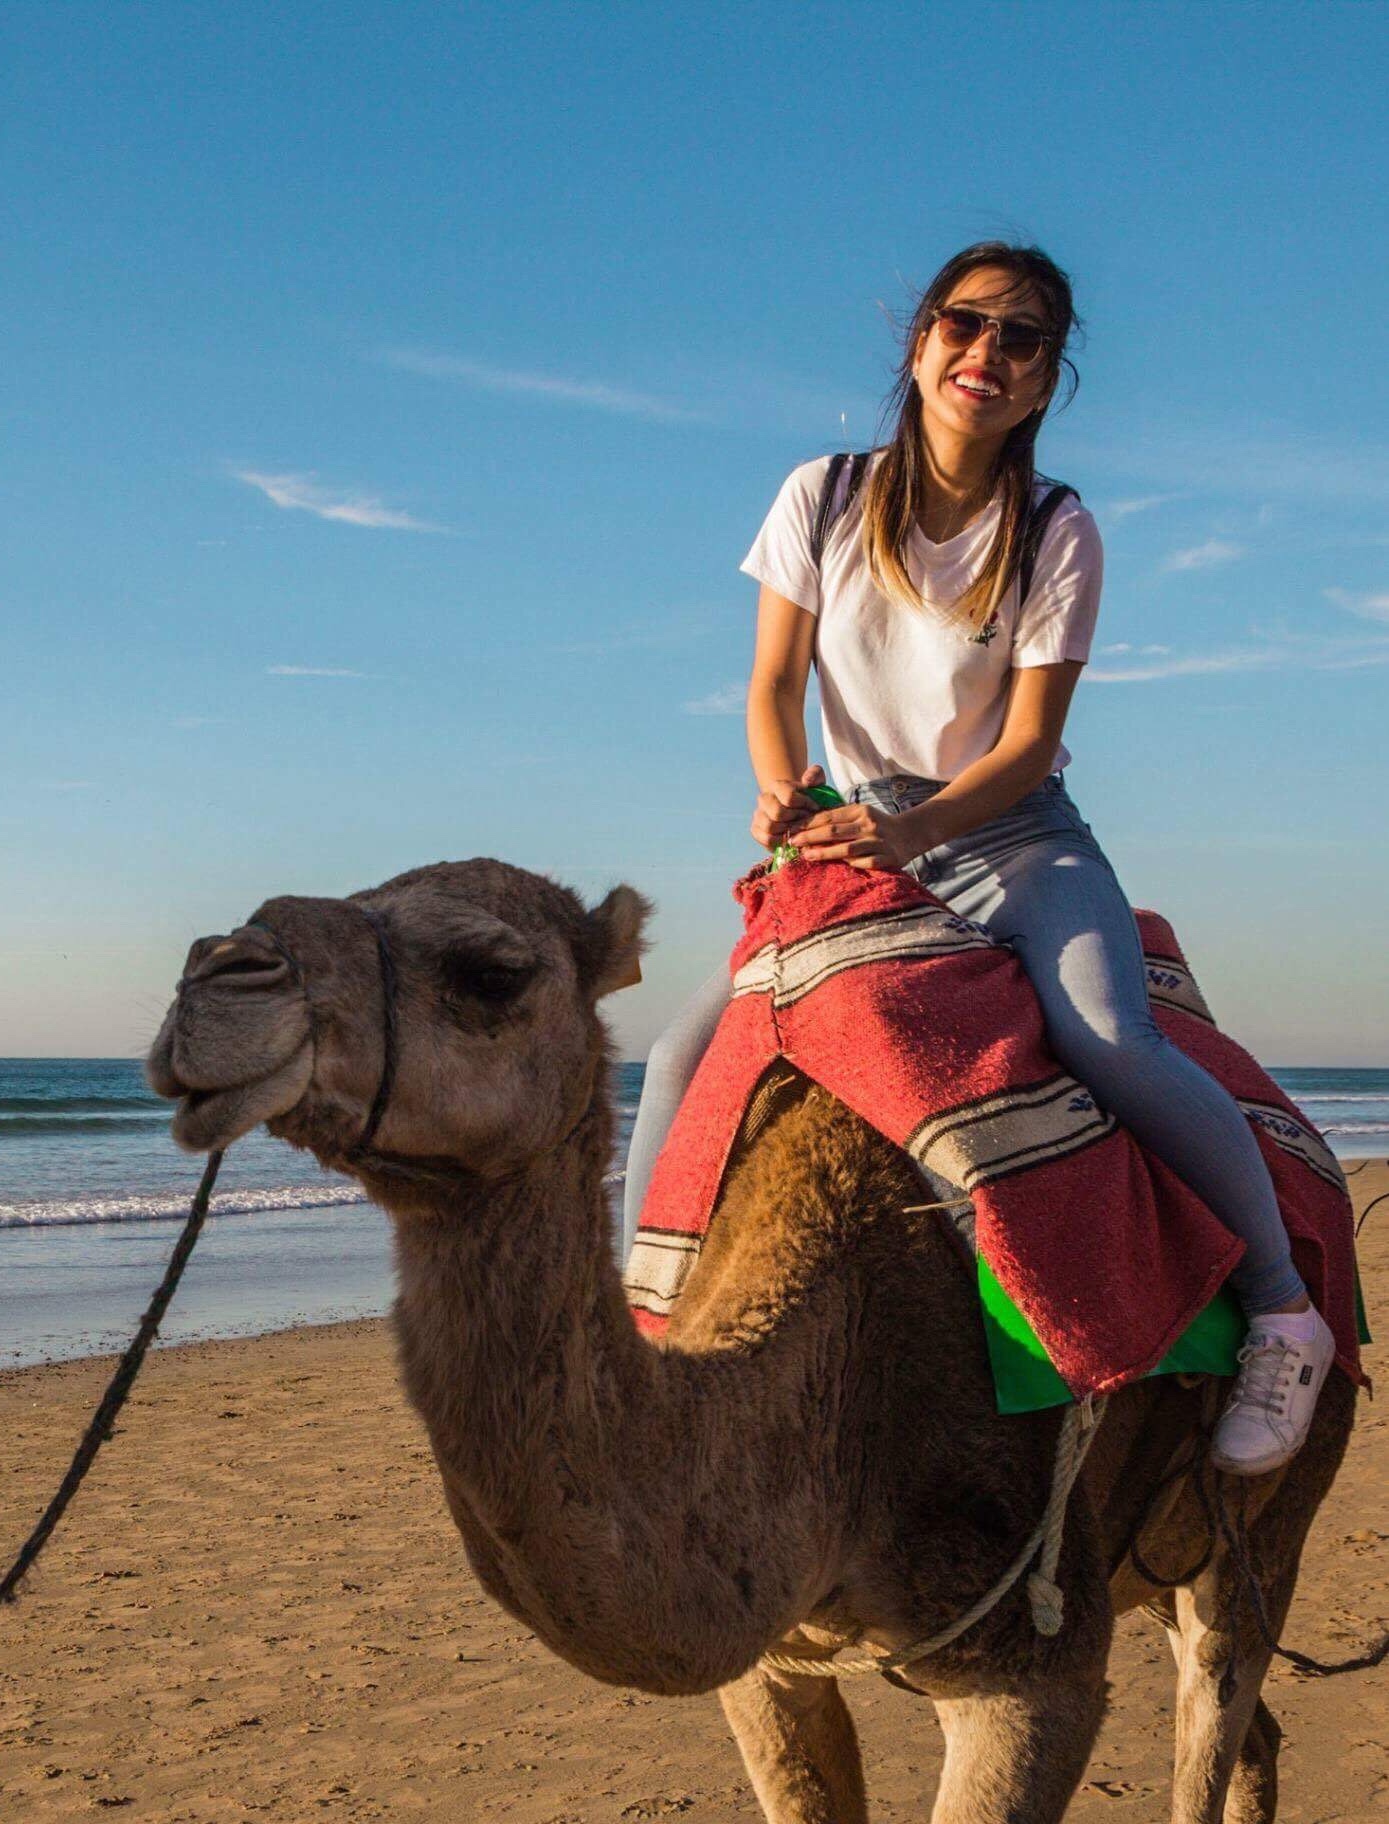 Camel riding in Morocco, photo by Sylvia Sarabia (courtesy of Study Abroad UC San Diego)